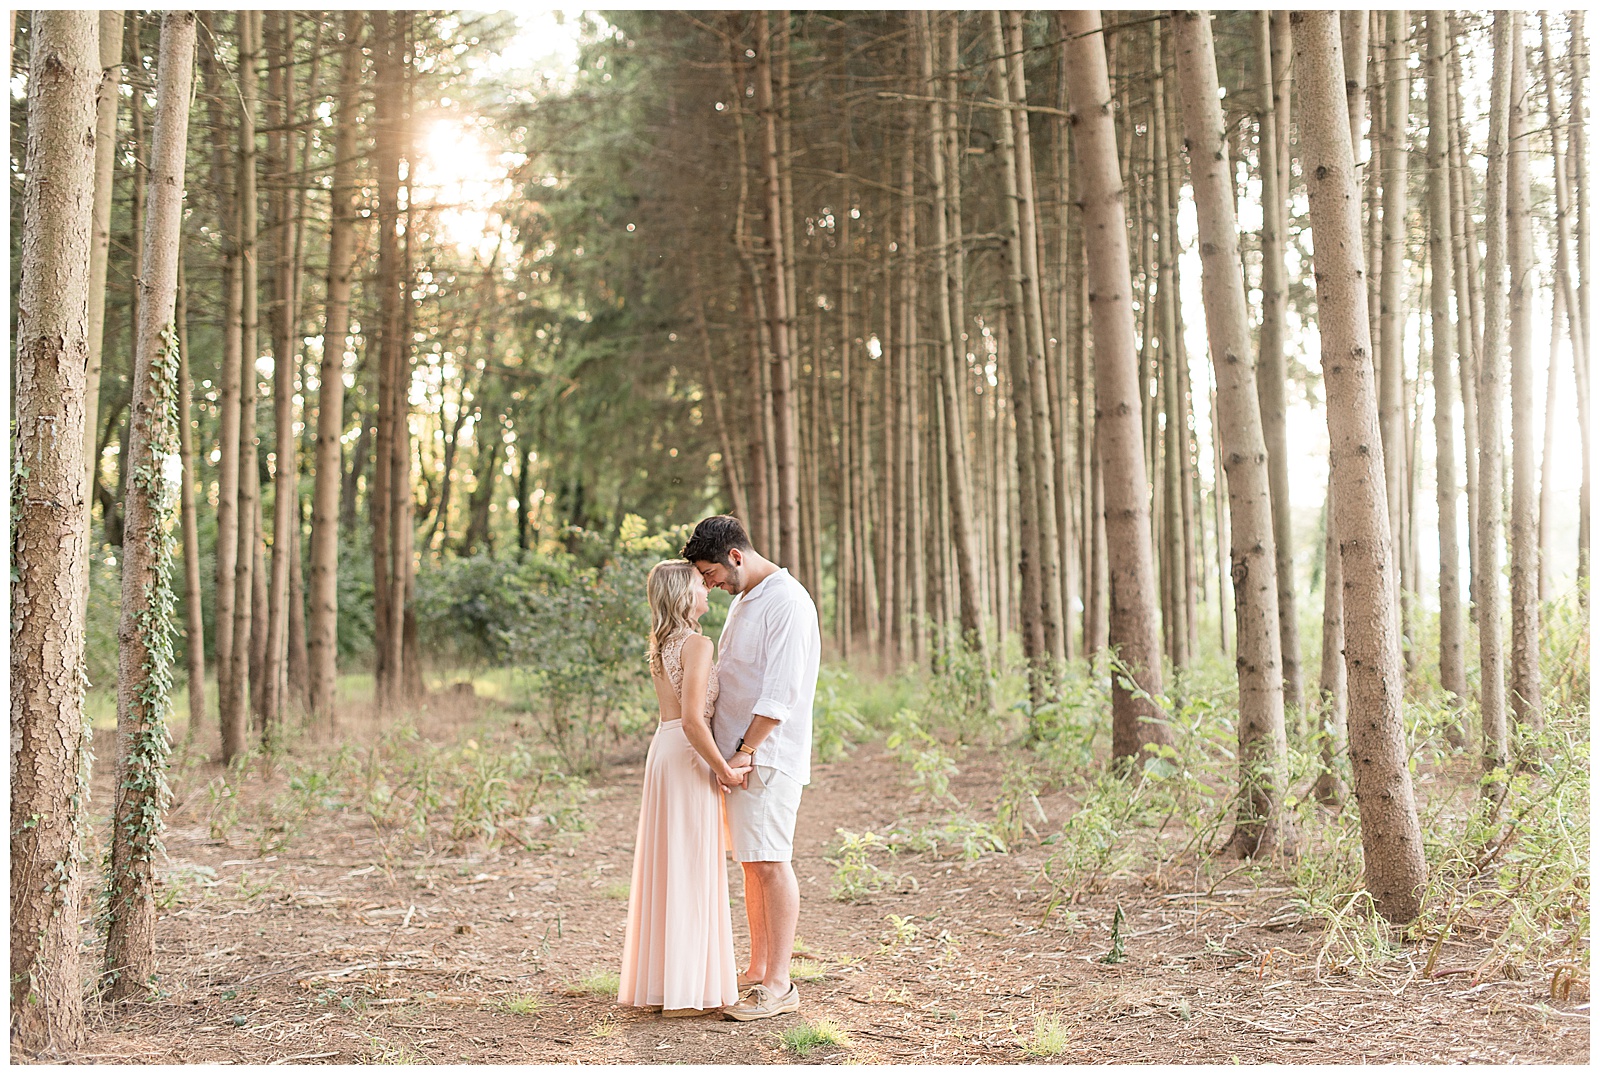 couple holding hands and looking at each other surrounded by rows of pine trees